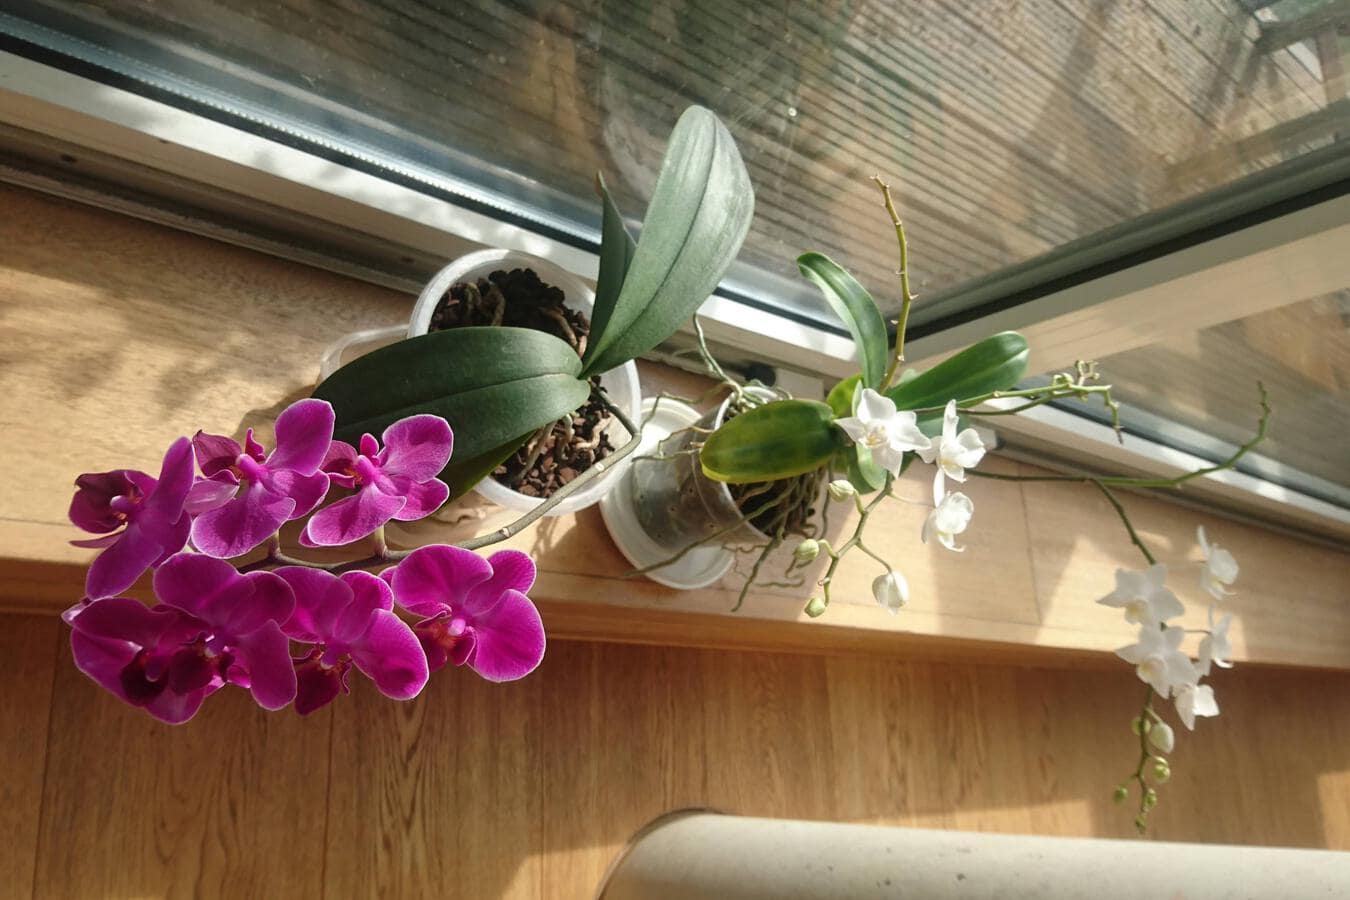 Taking care of orchids